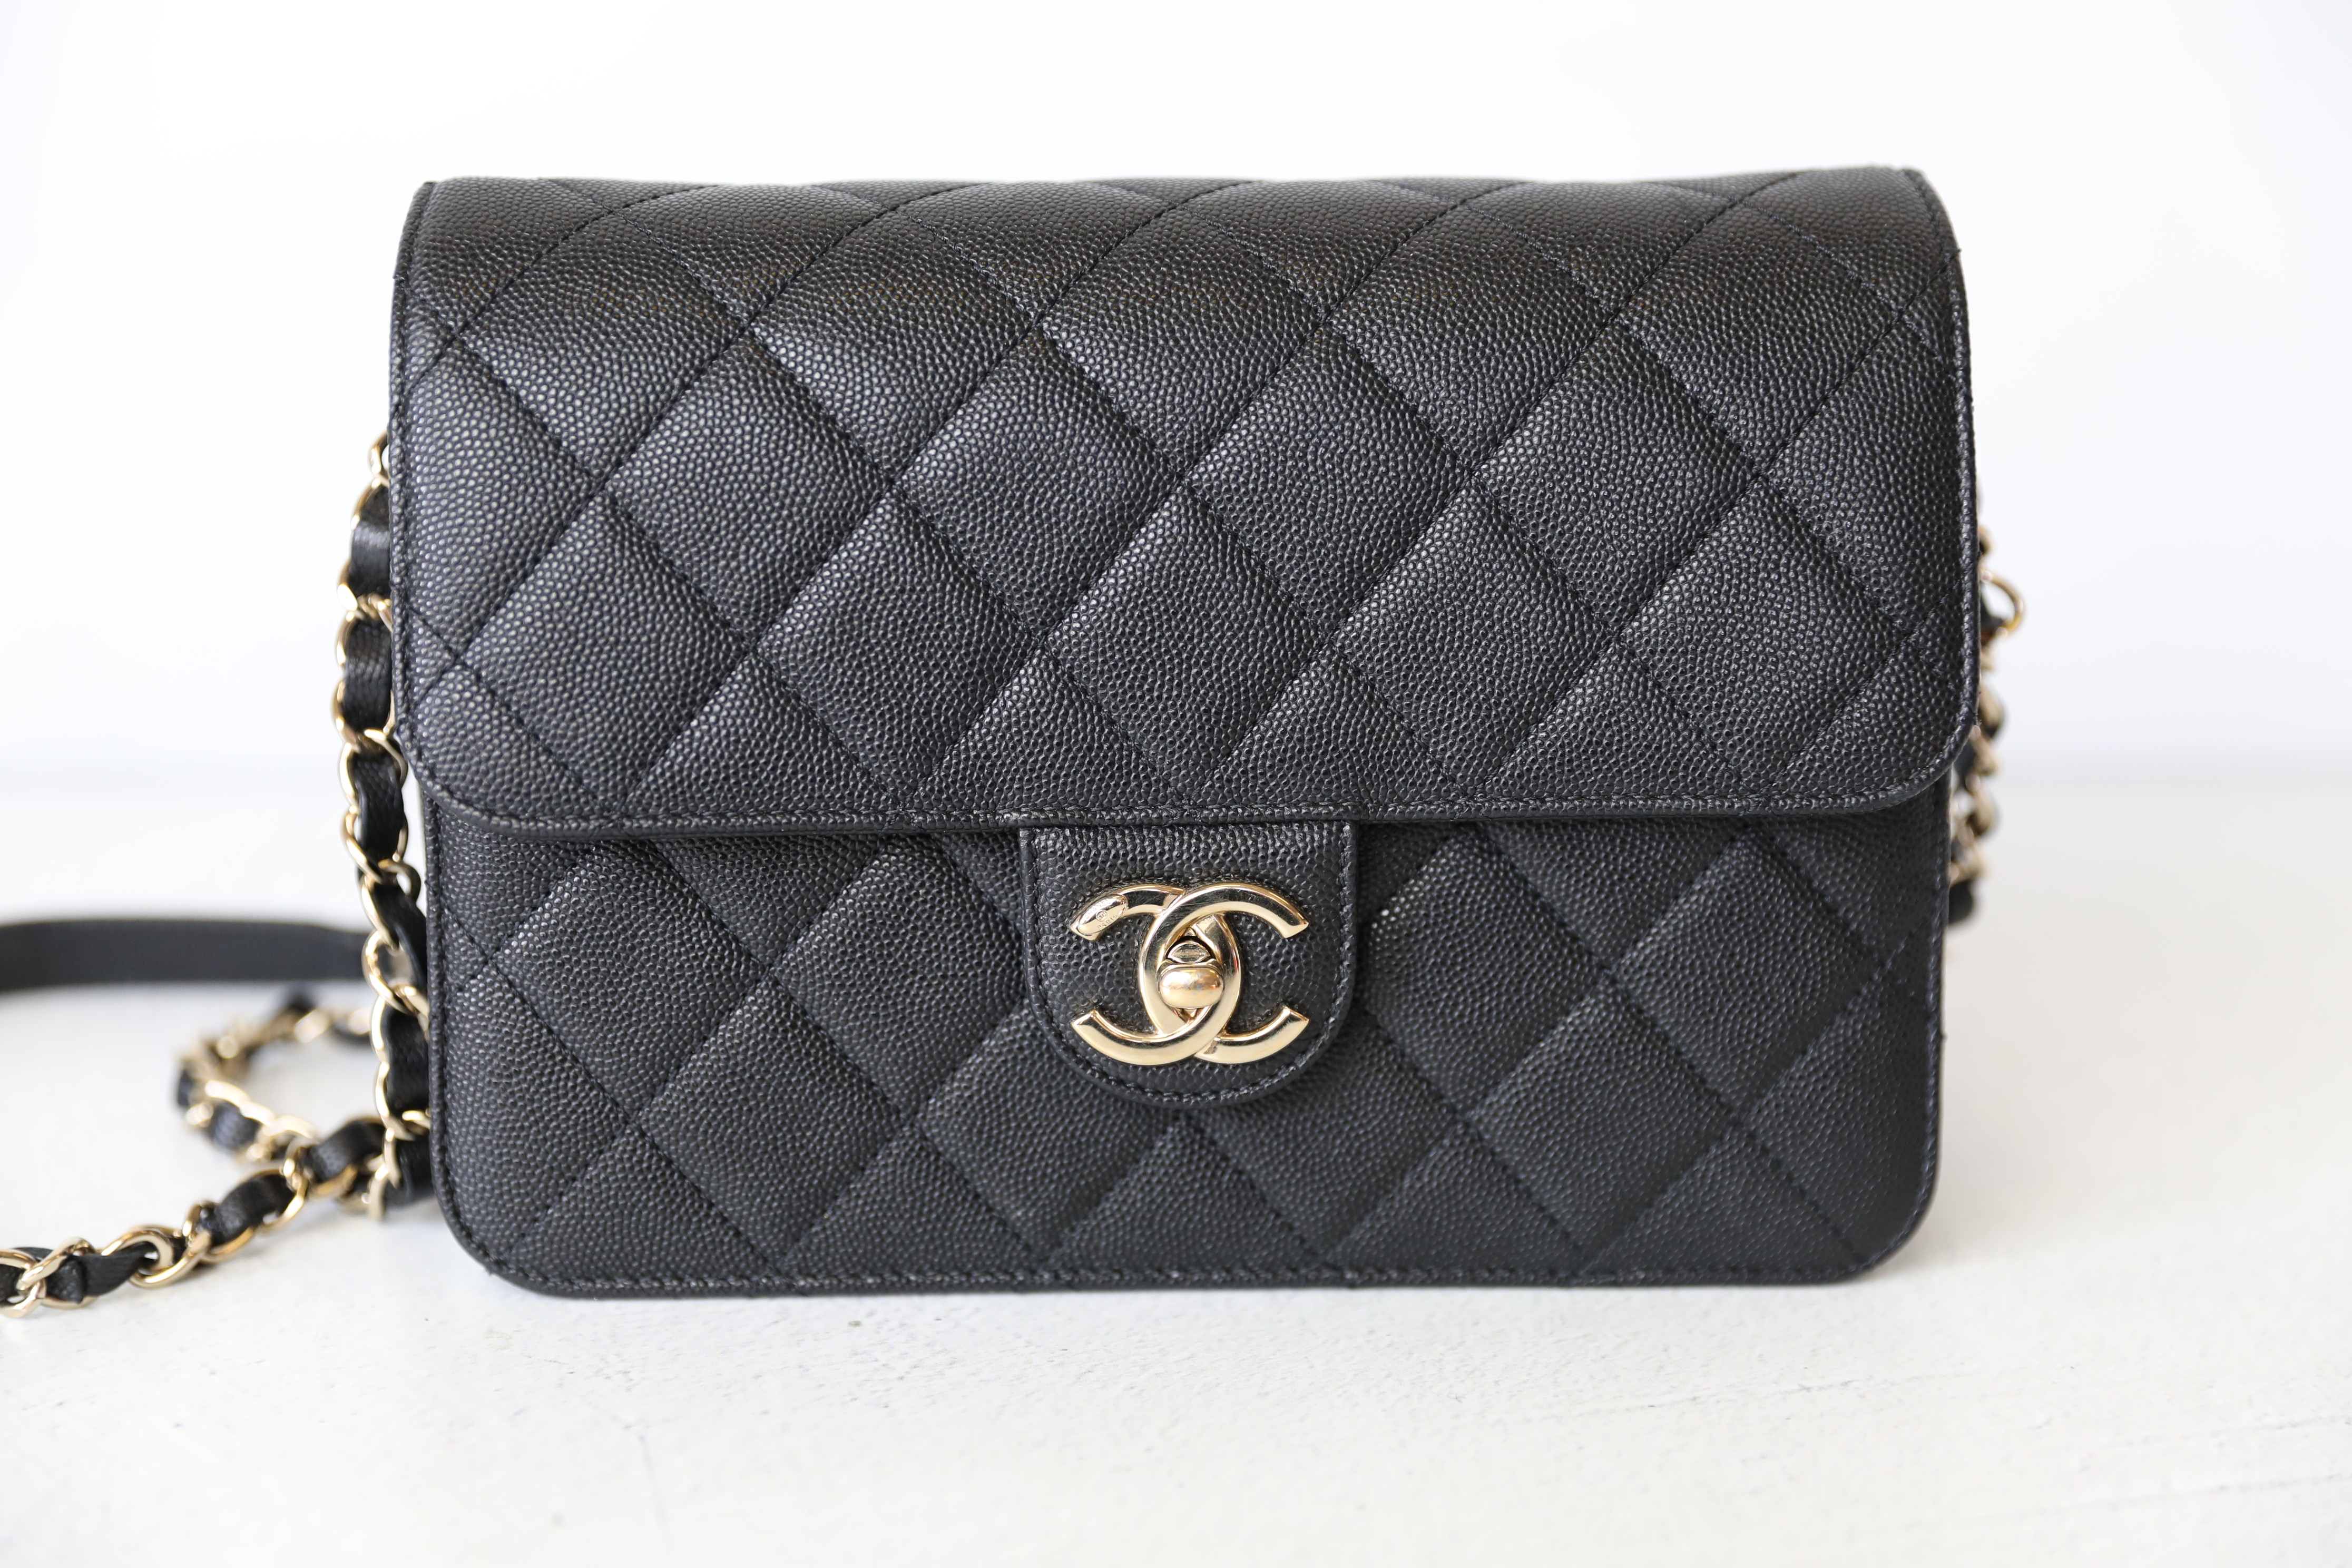 Chanel Like a Wallet Flap, Black Caviar with Gold Hardware, Preowned No  Dustbag WA001